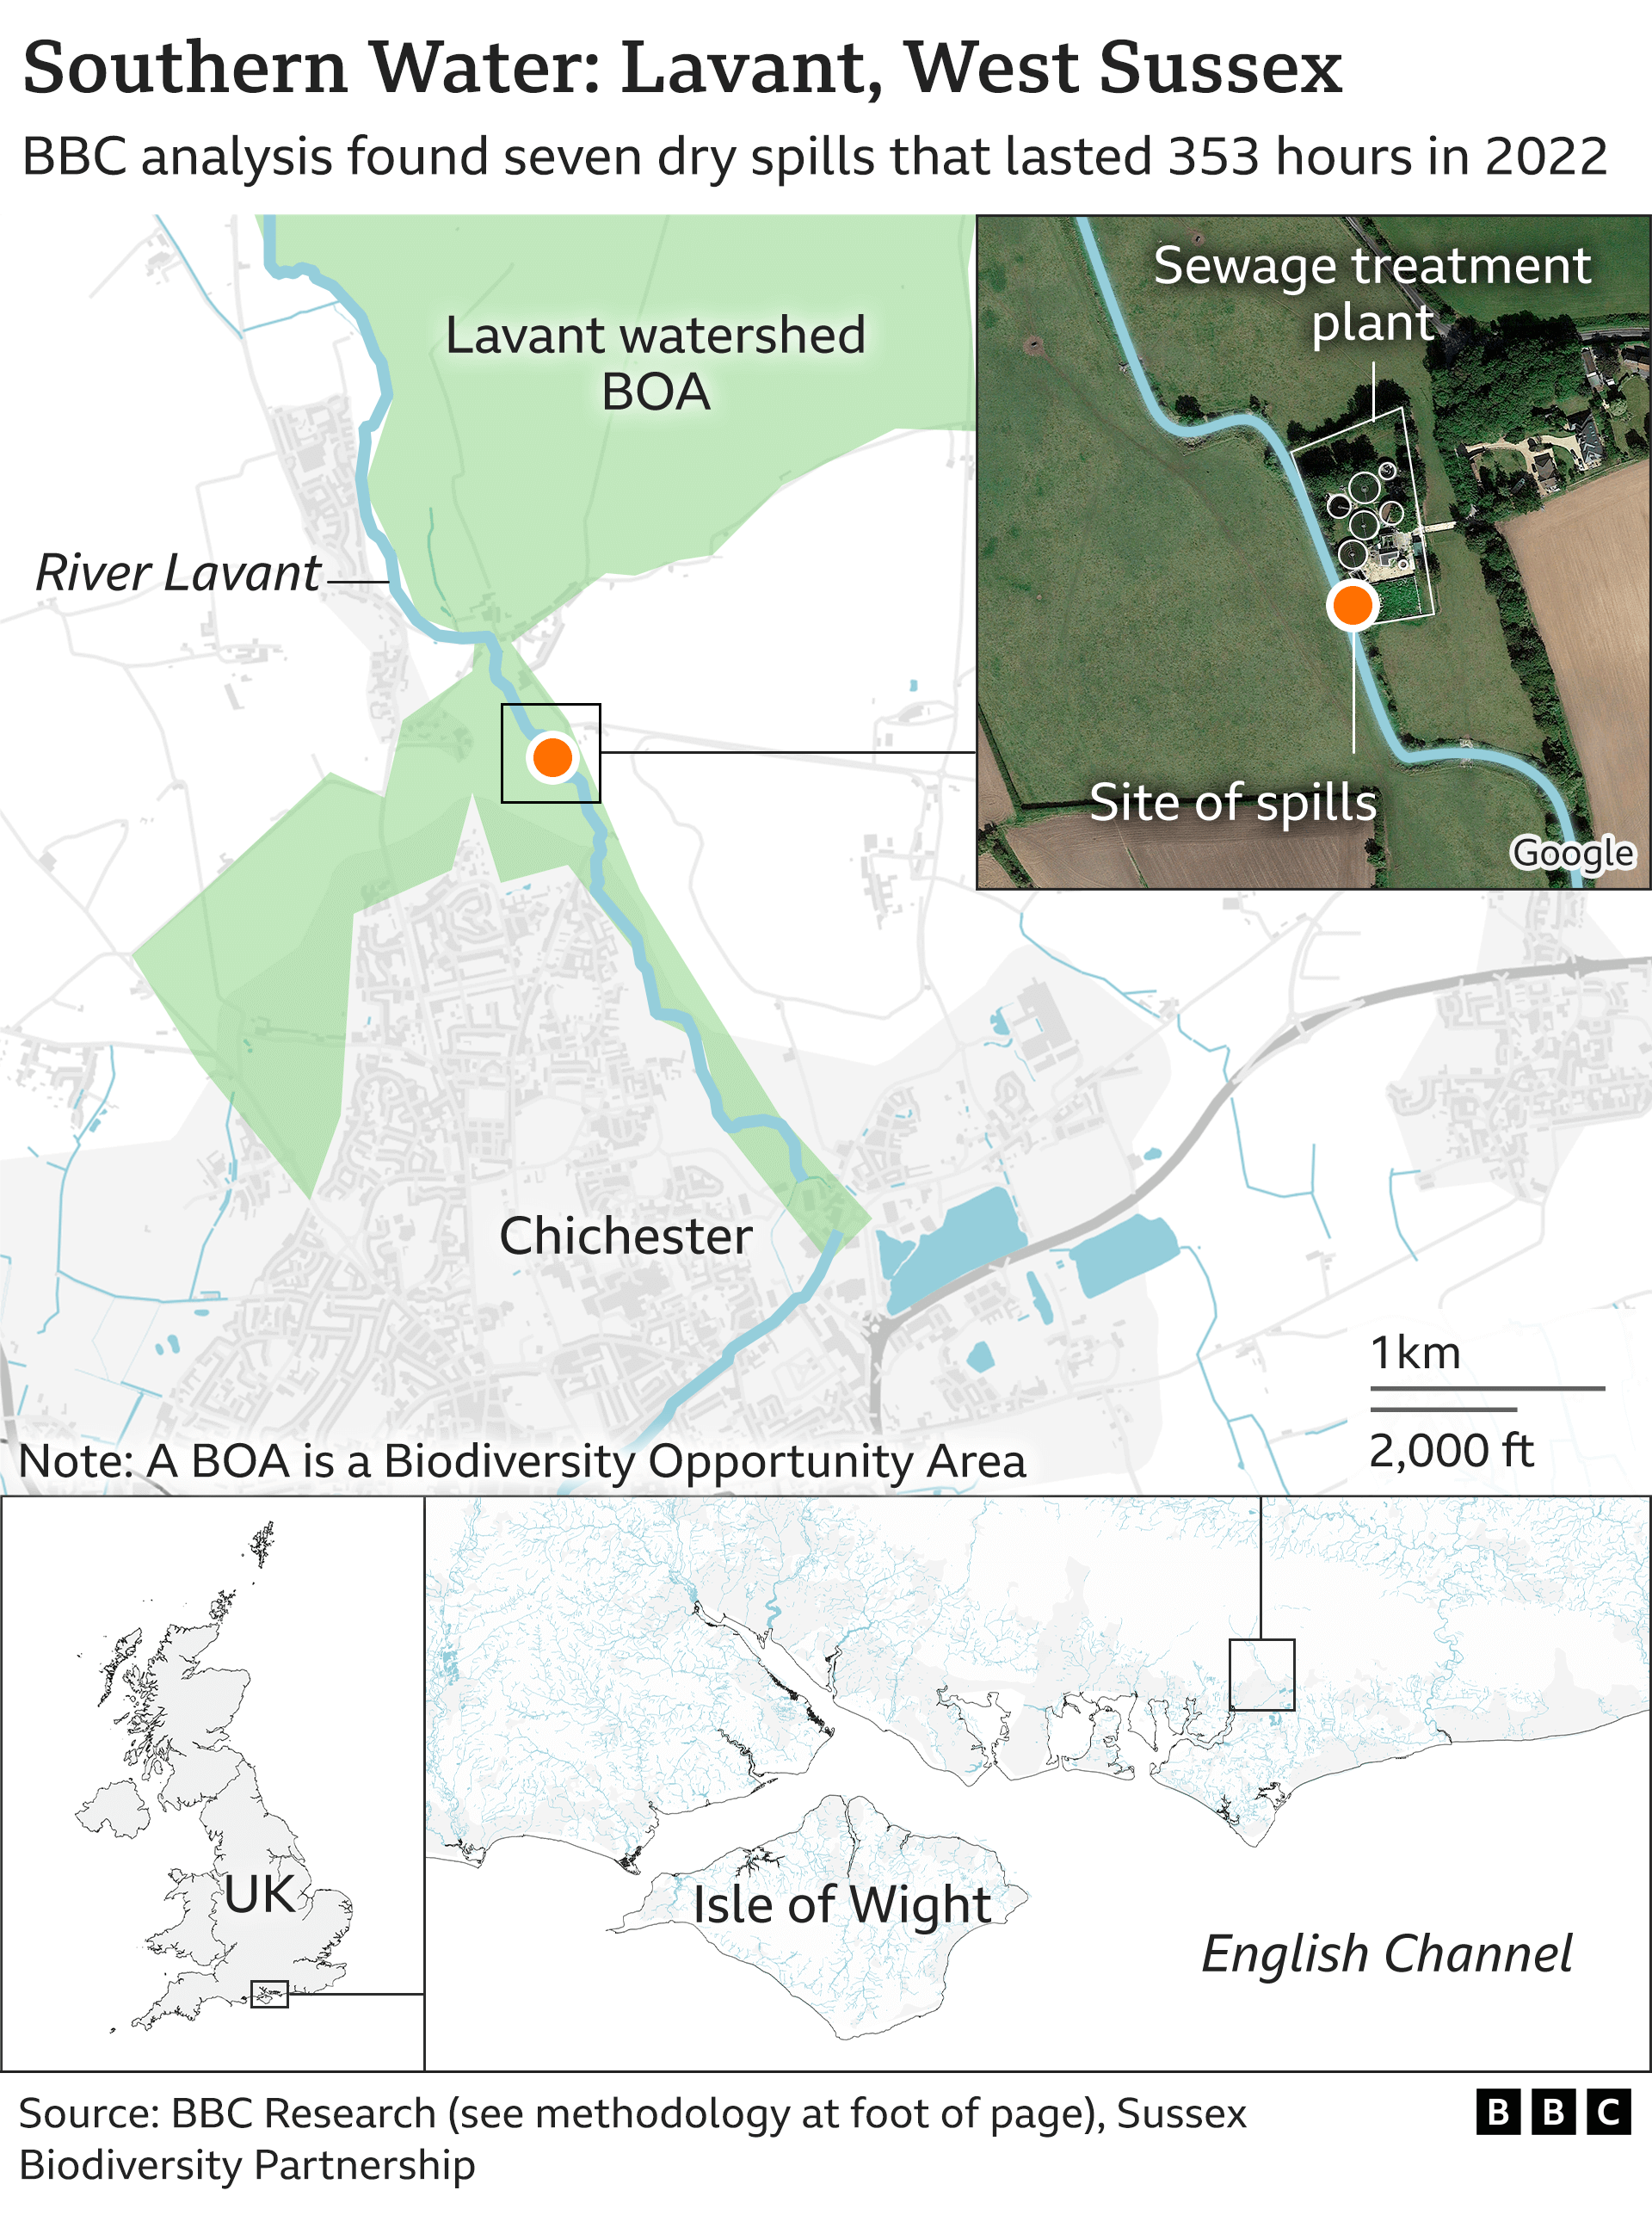 Map showing Lavant, West Sussex, where there were six dry spills lasting 314 hours in 2022